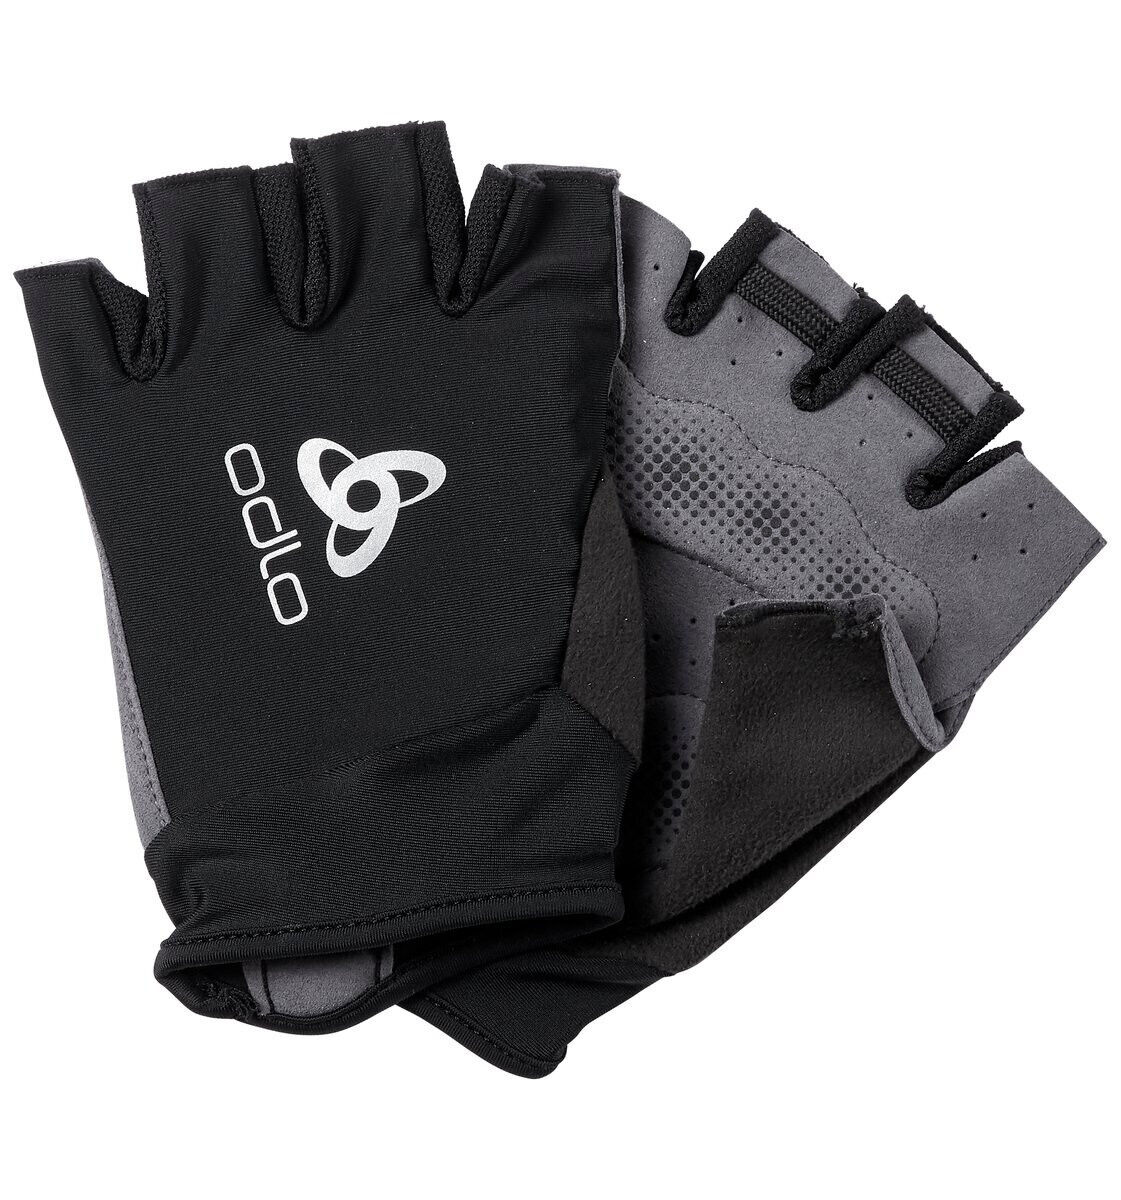 Odlo Gloves Fingerless Active Road - Guantes ciclismo - Hombre